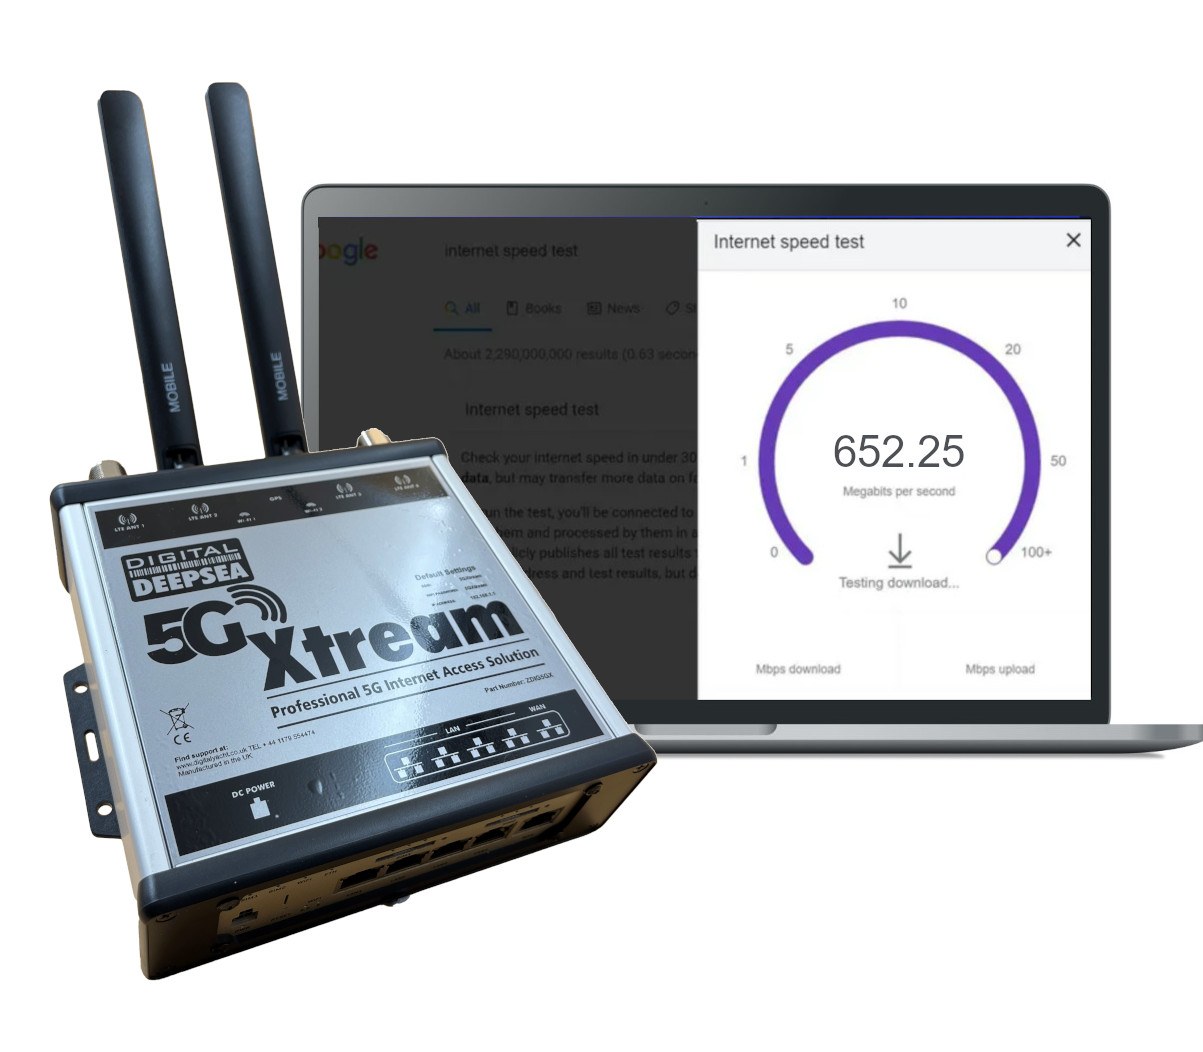 Digital Yacht 5G Xtream brings ultrafast internet on board and with Starlink connectivity too